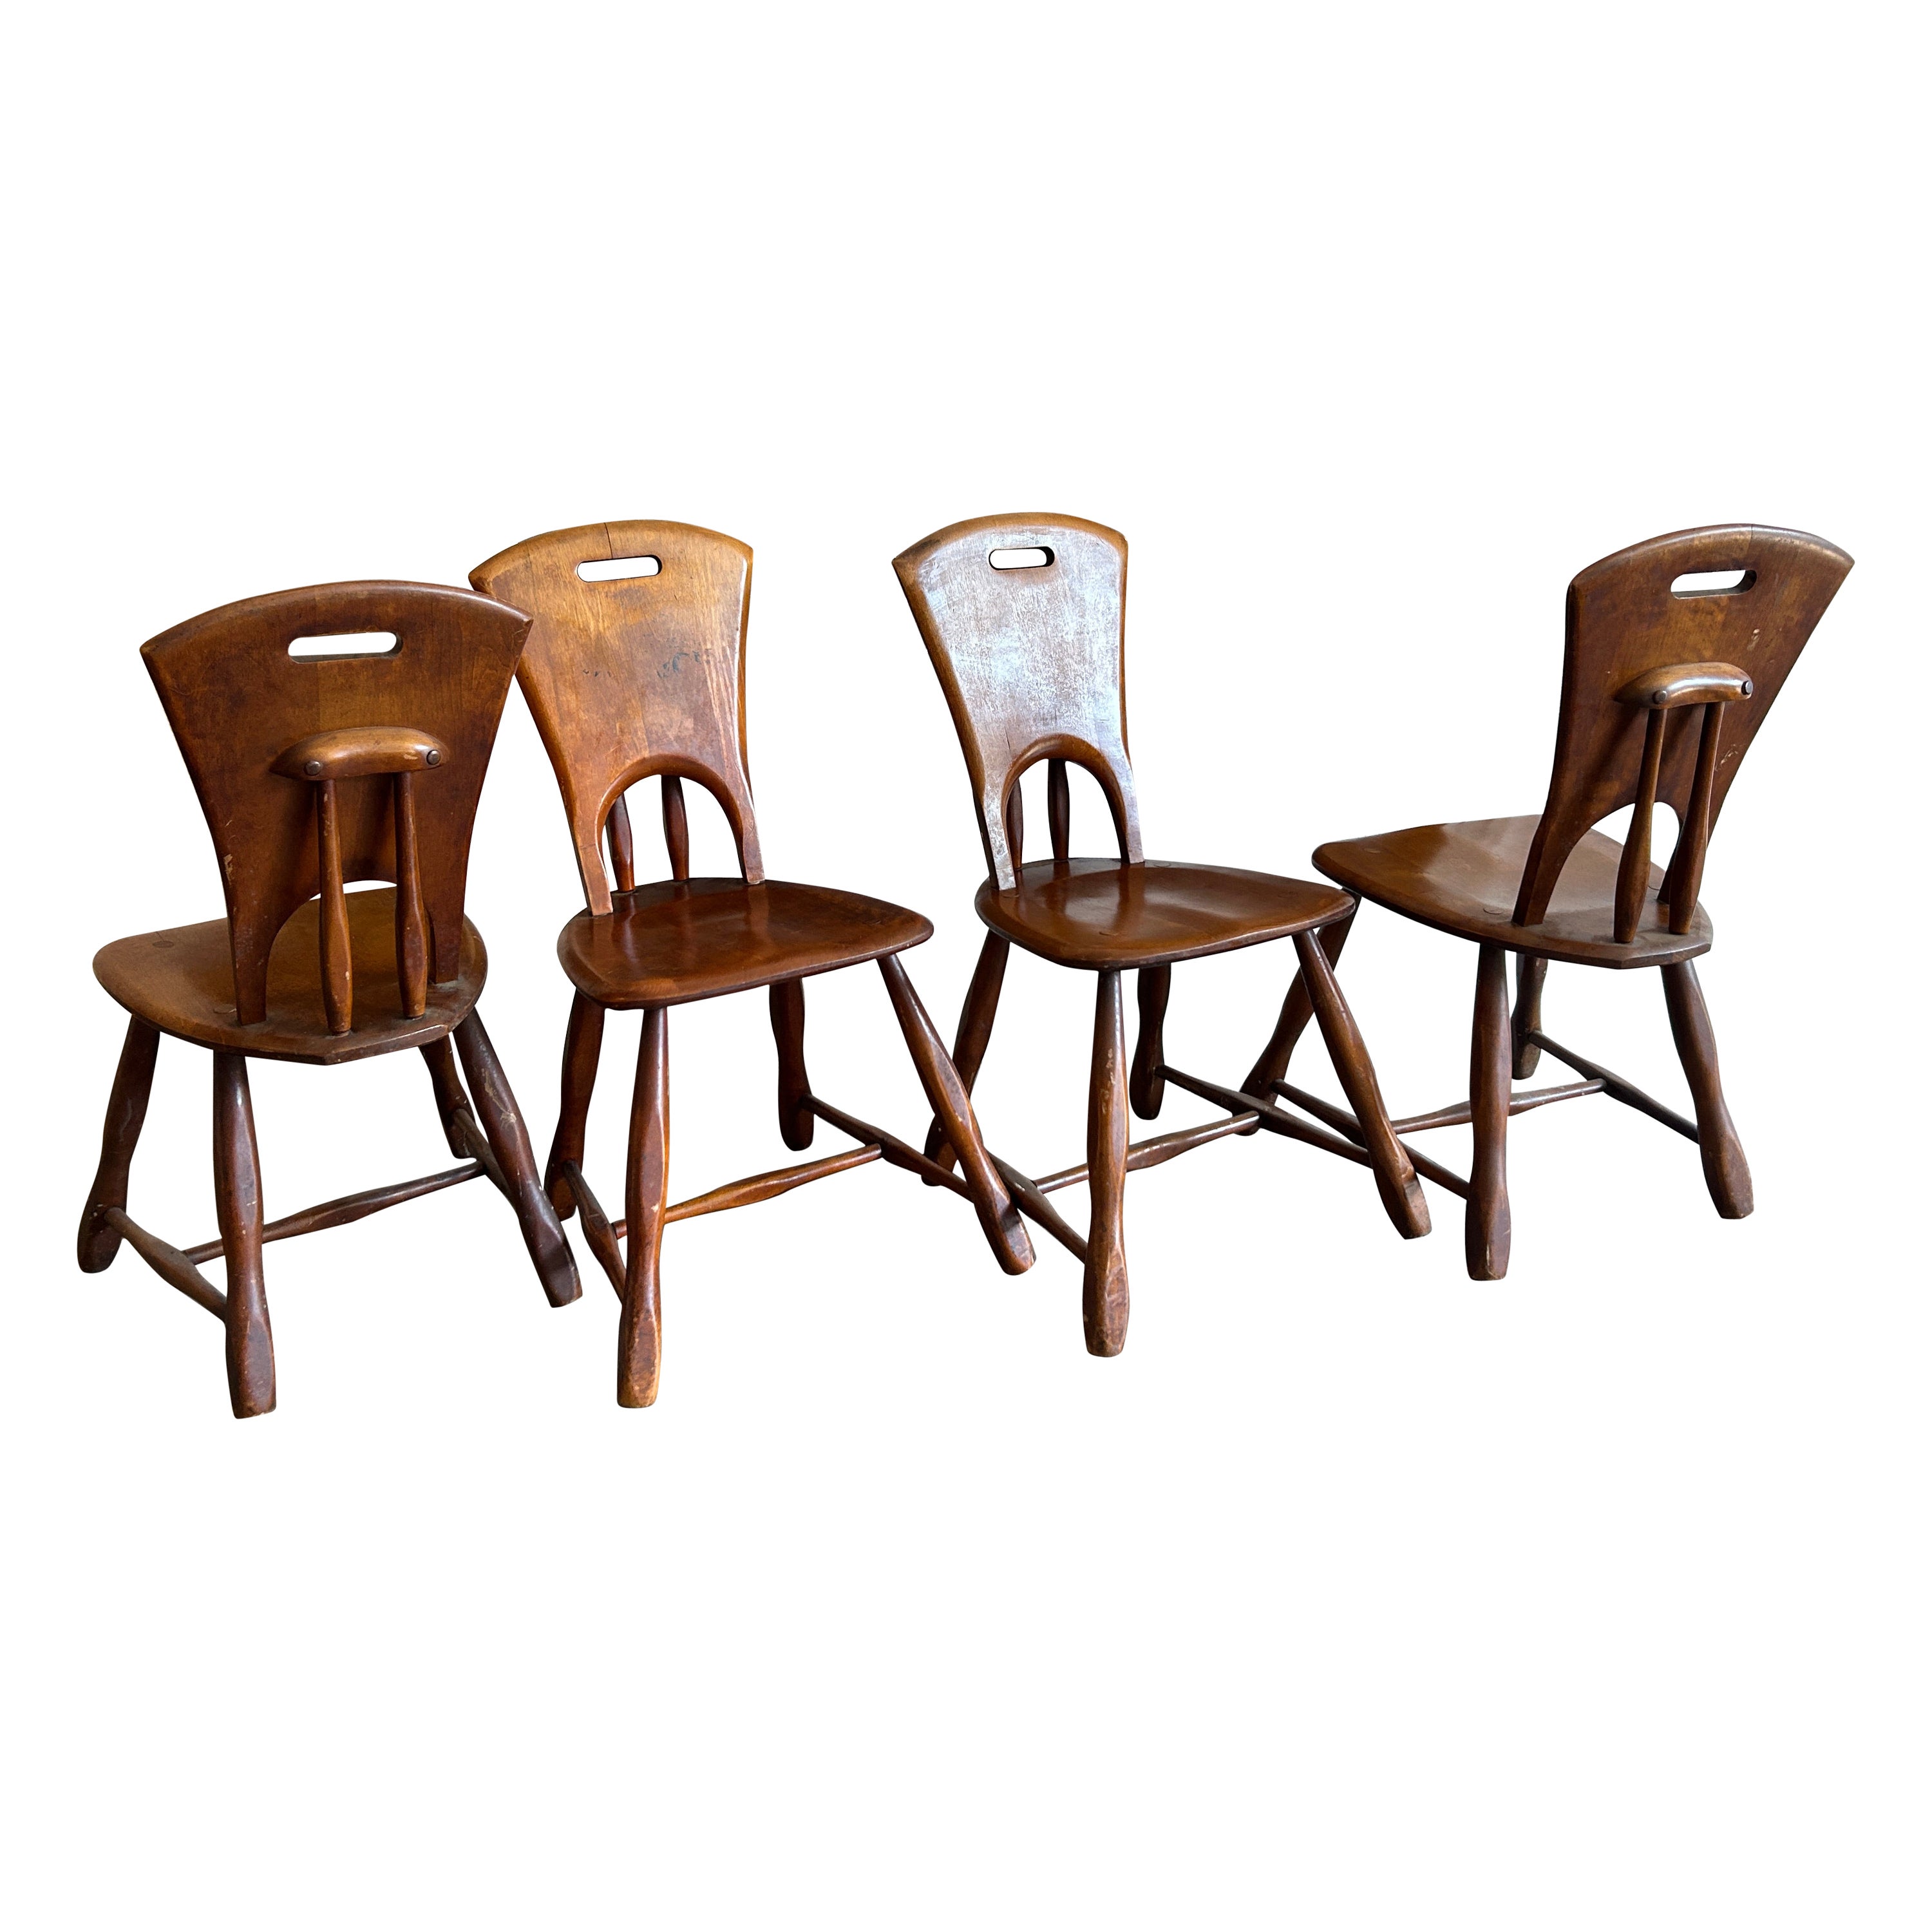 Set of 4 Mid-Century Modern Solid Wood Sculptural Craft Rustic Dining Chairs